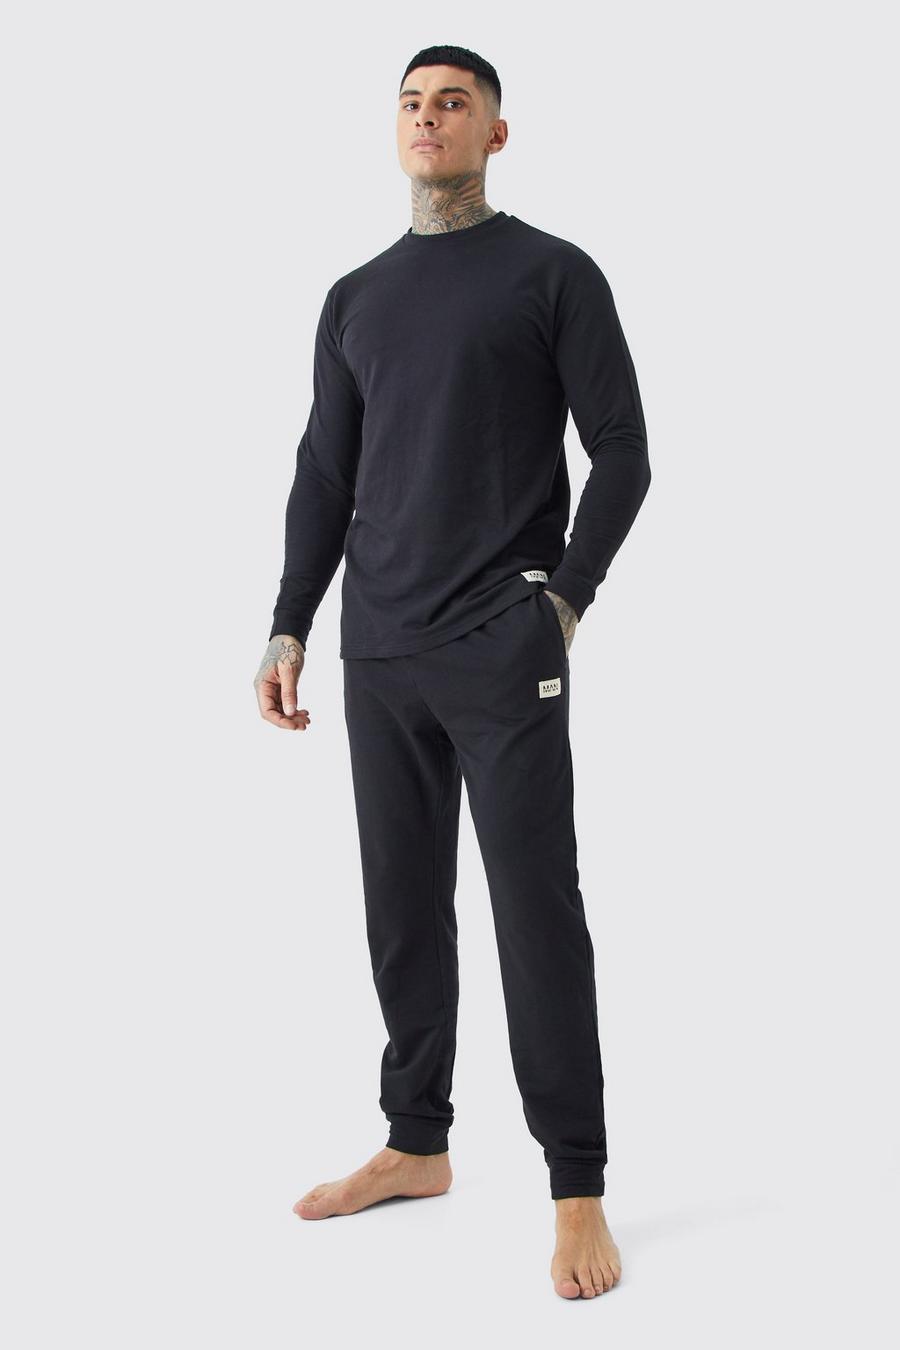 Black Tall Soft Feel Lounge Top And Jogger Set image number 1